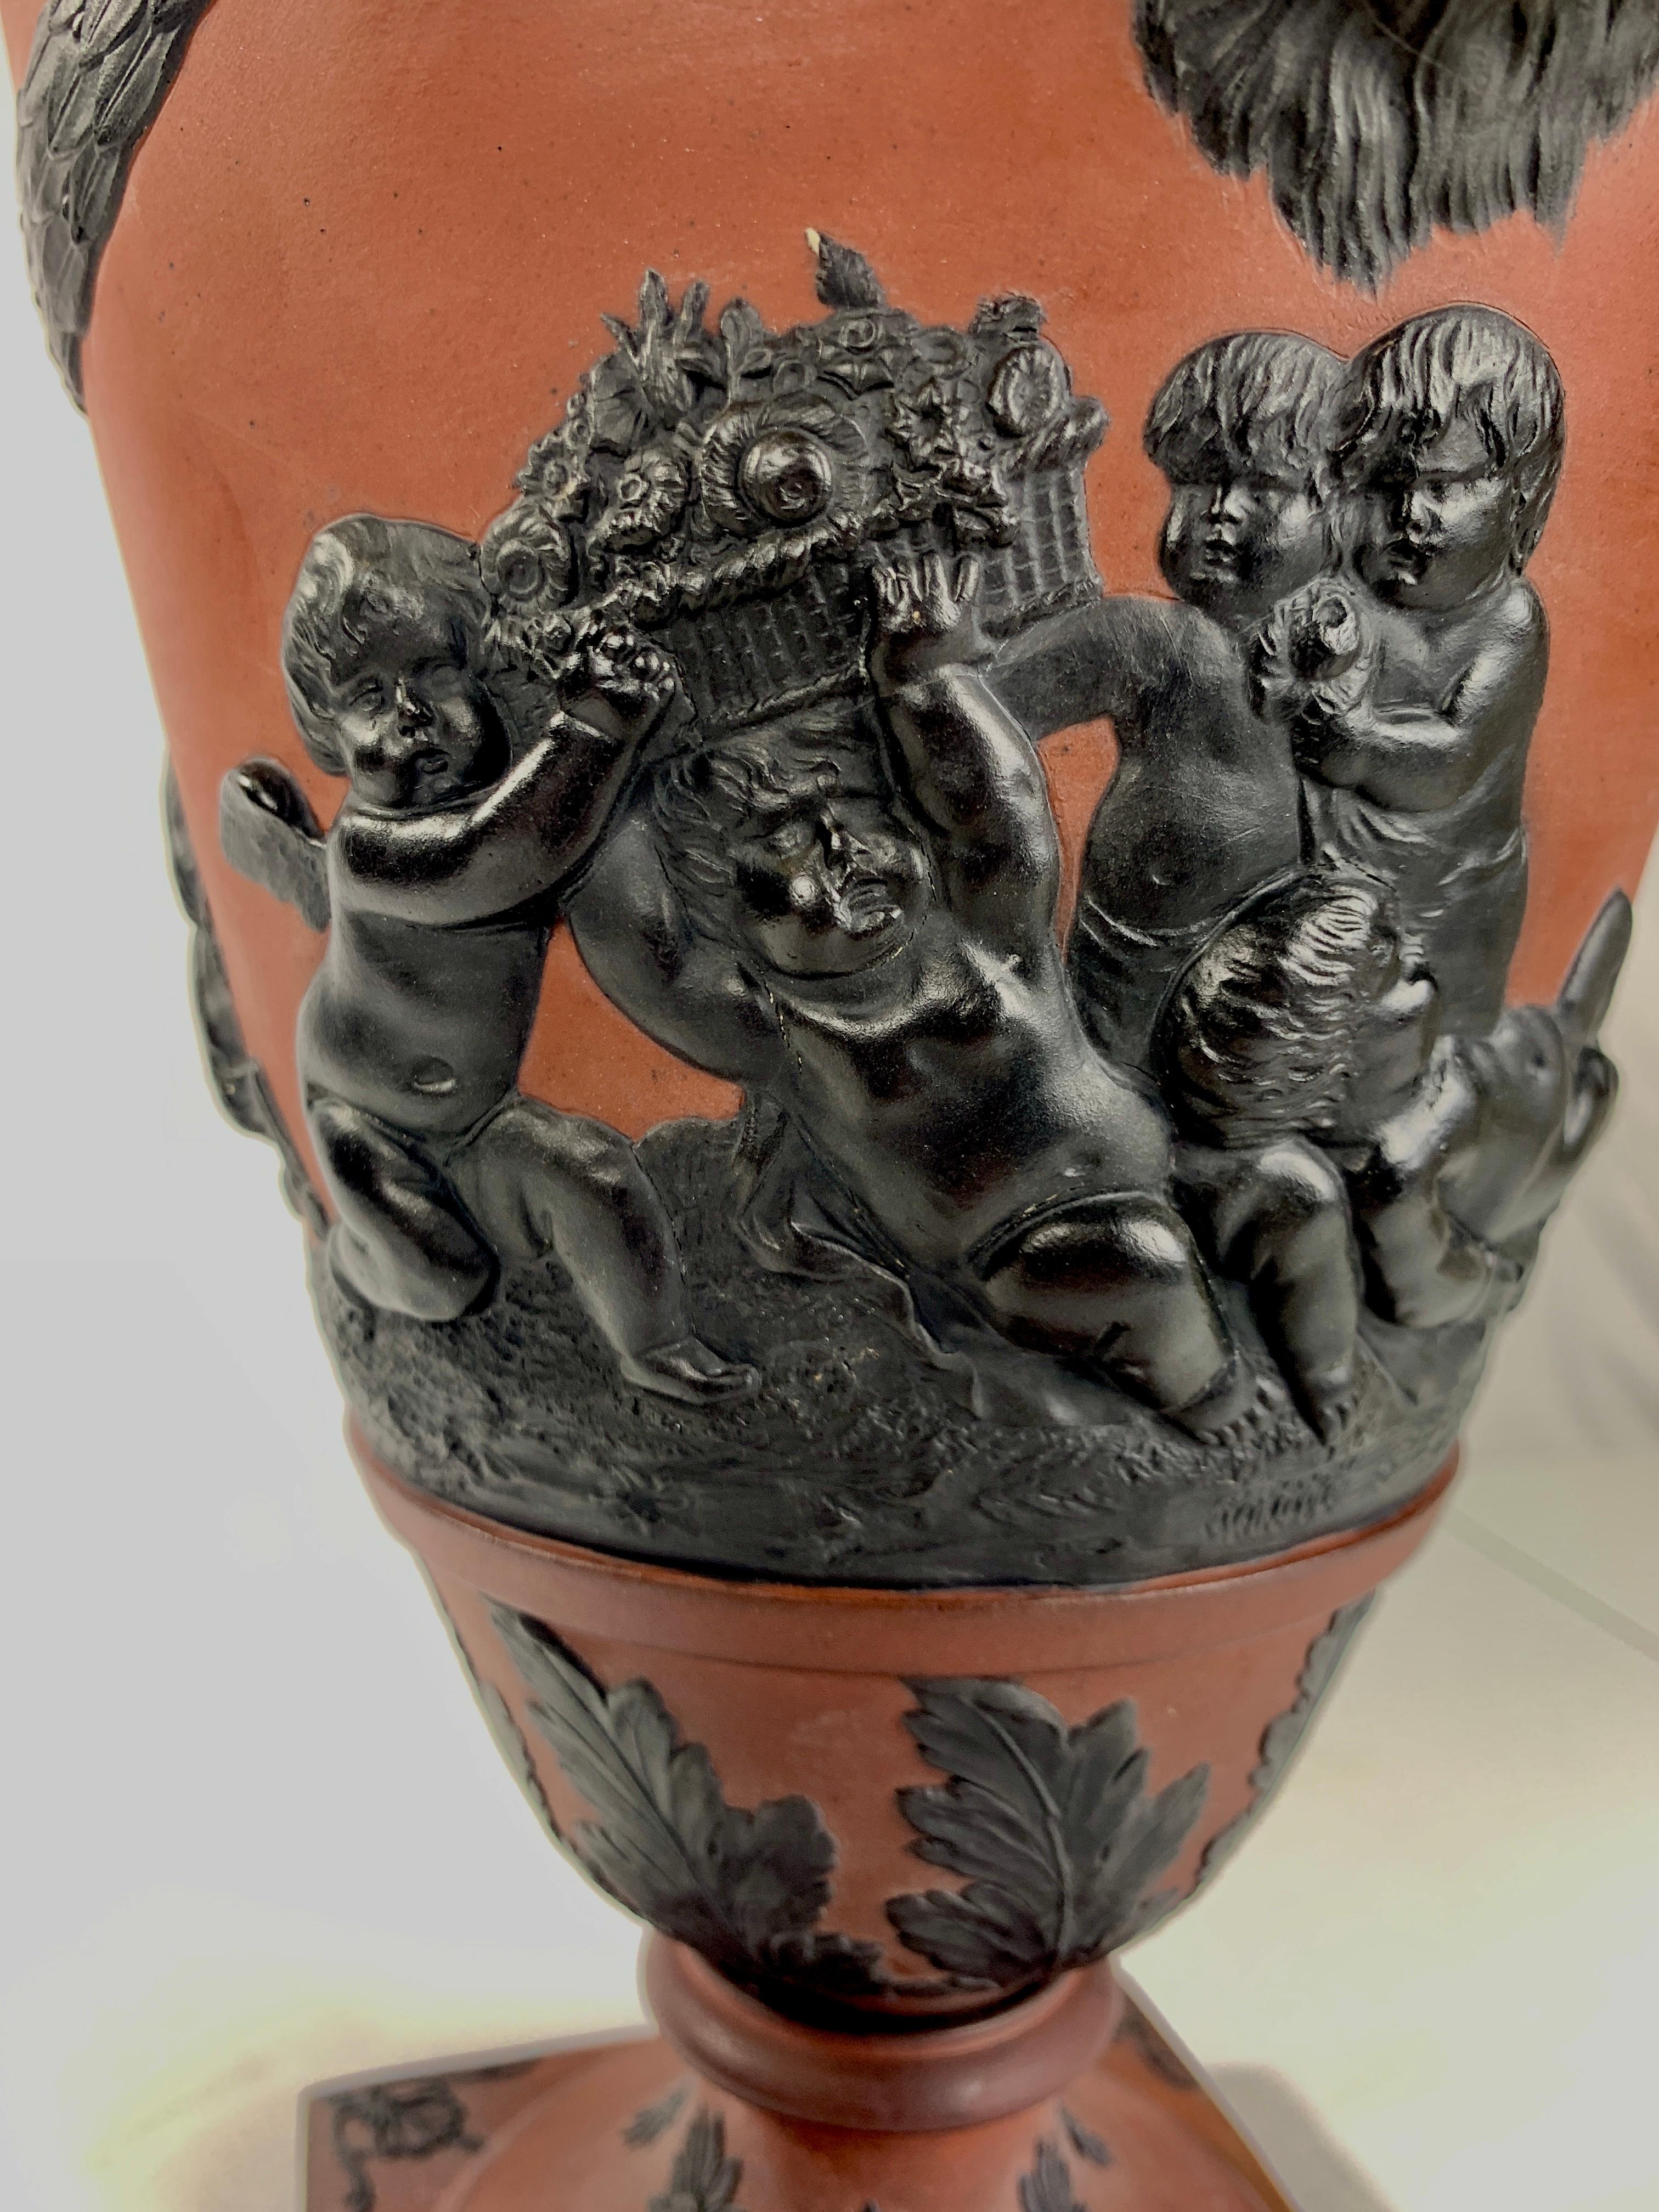 19th Century Rosso Antico and Black Basalt Vase Made Circa 1815 with Neoclassical Decoration